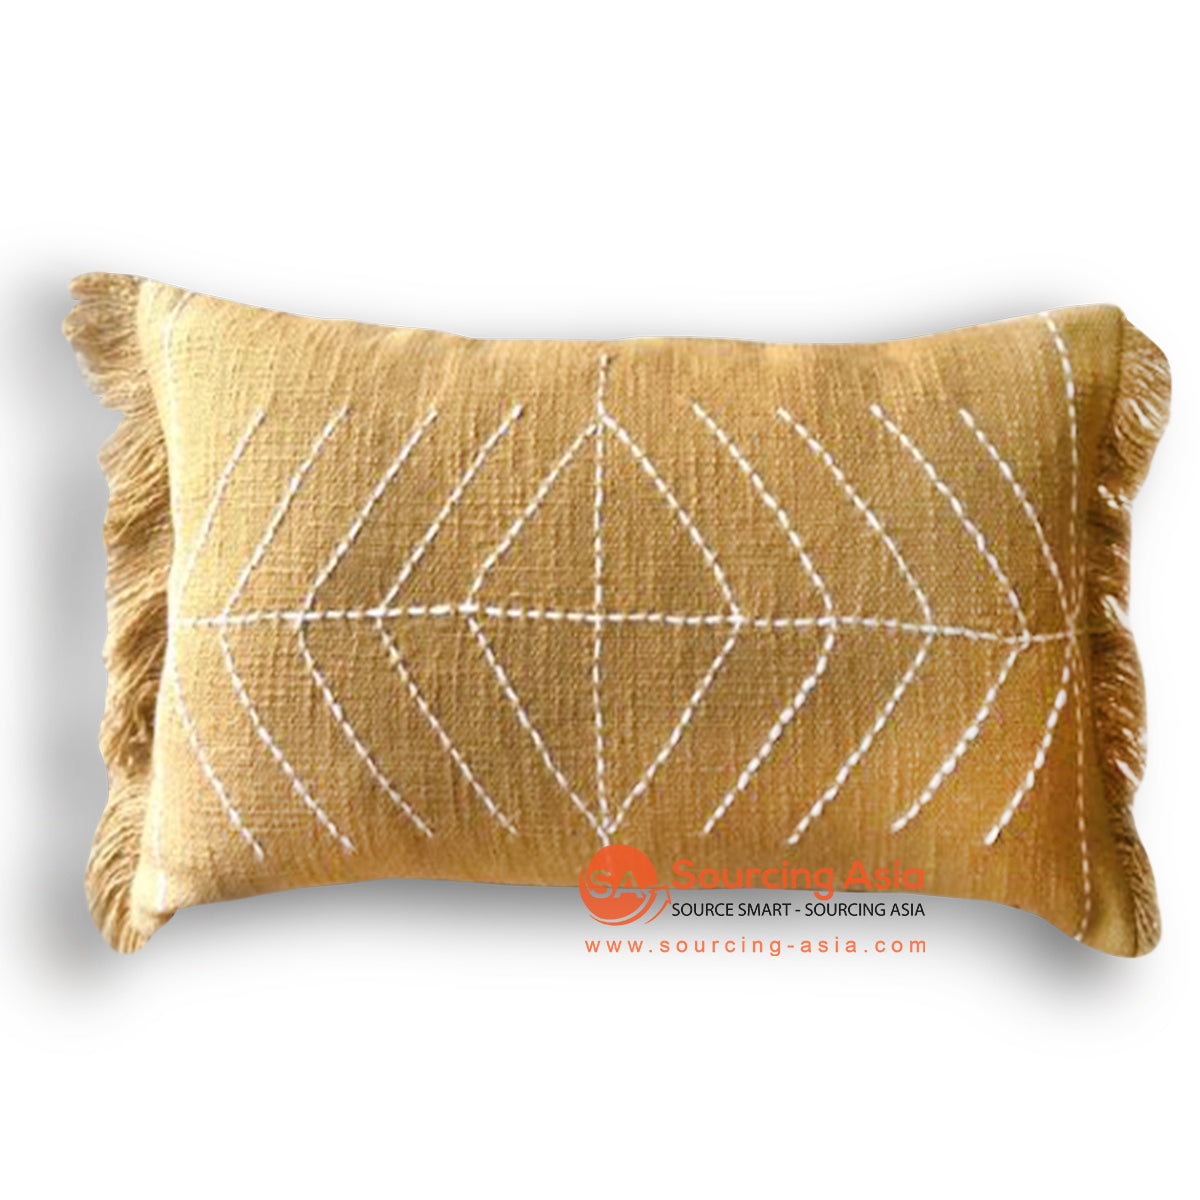 HIP020 YELLOW TUMANGGAL FABRIC HAND-STITCHED RECTANGULAR CUSHION WITH EMBROIDERY AND FRINGE (PRICE WITHOUT INNER)